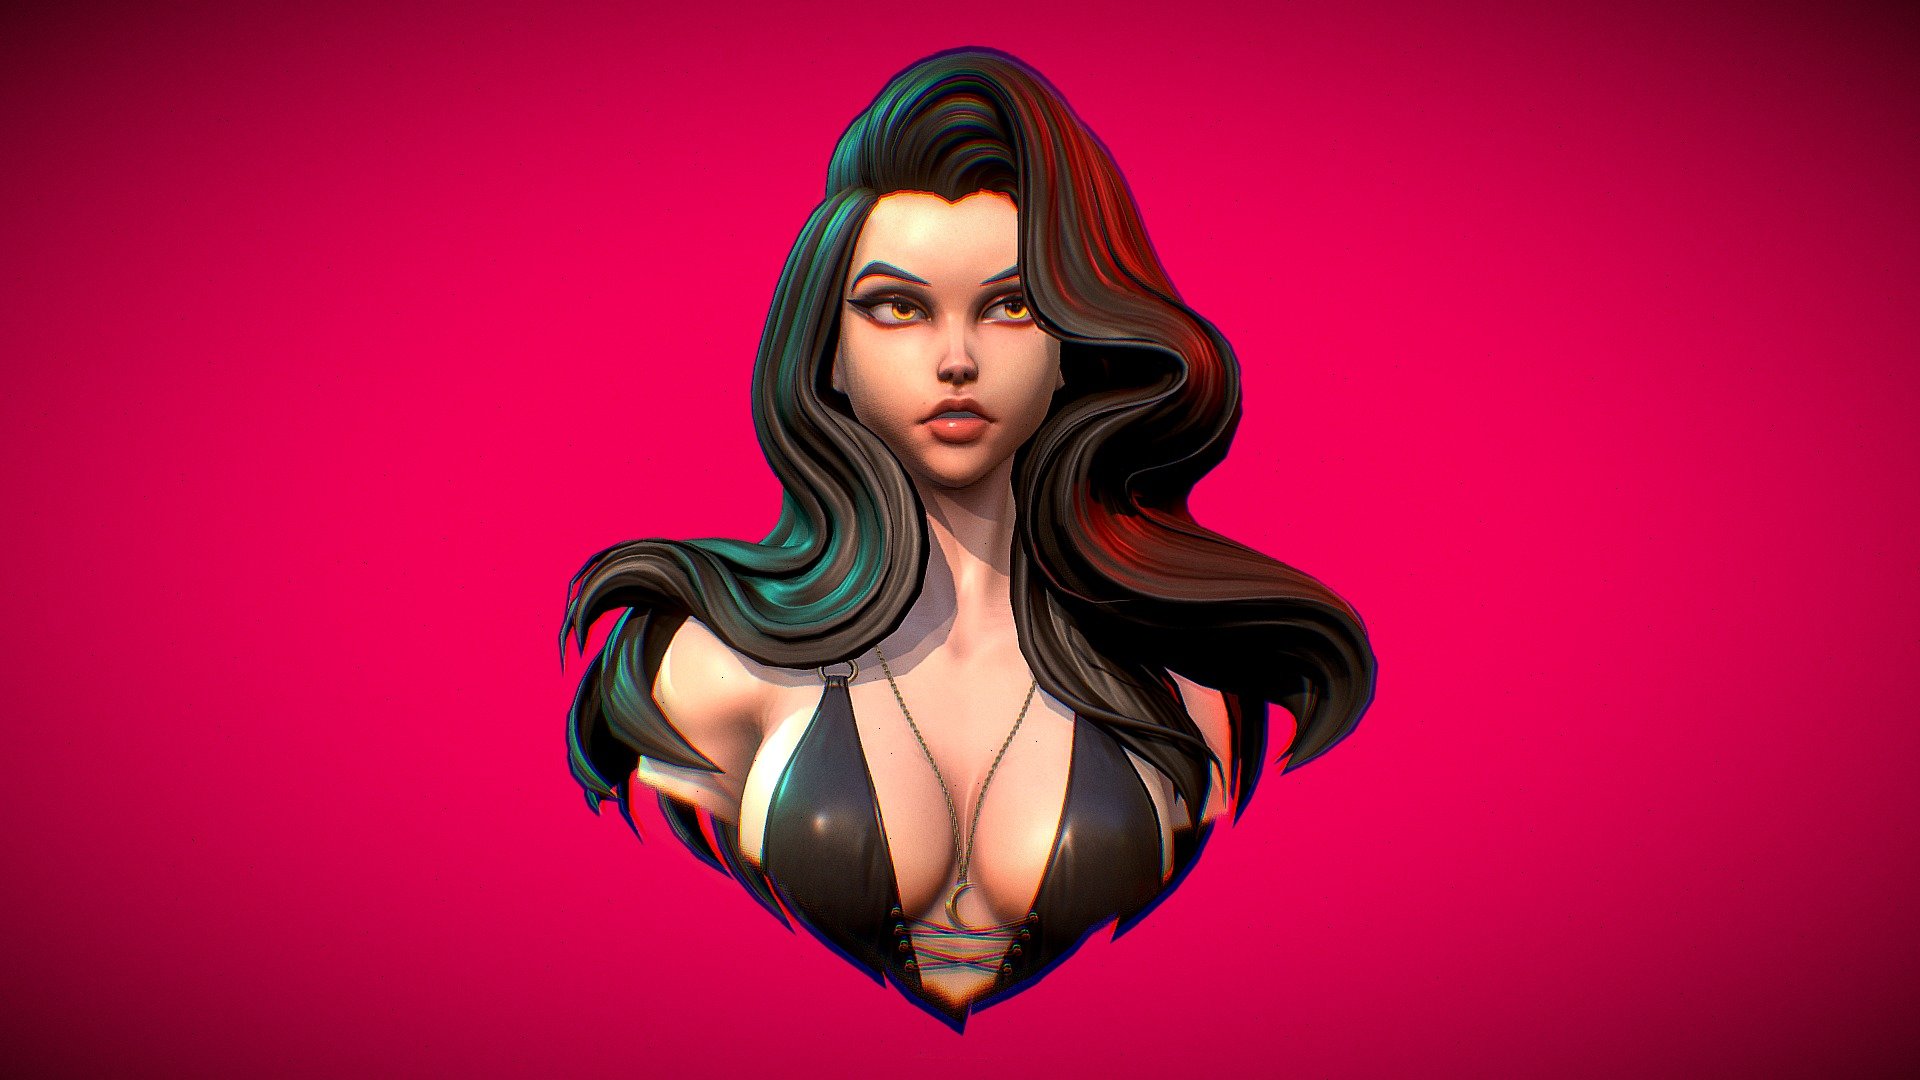 According to author’s paintings:

https://www.artstation.com/kyuyongeom

https://www.artstation.com/rossdraws

3D-model made in Blender, texturing in Substance Painter, baking in marmoset toolbag 4 - Girl with black hair - 3D model by RegnadBIT 3d model